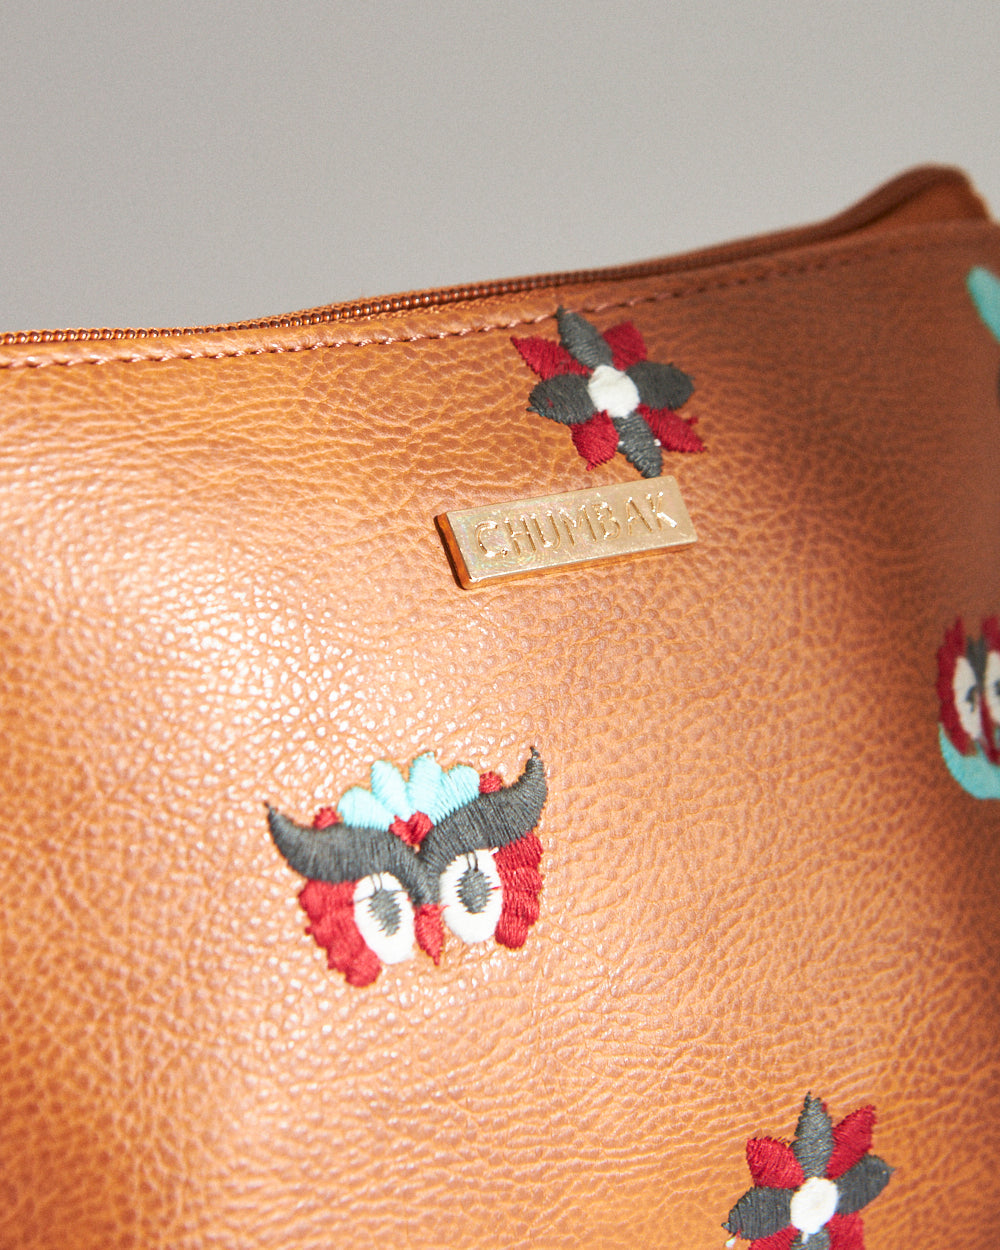 Owl Eyes Embroidered Pouch